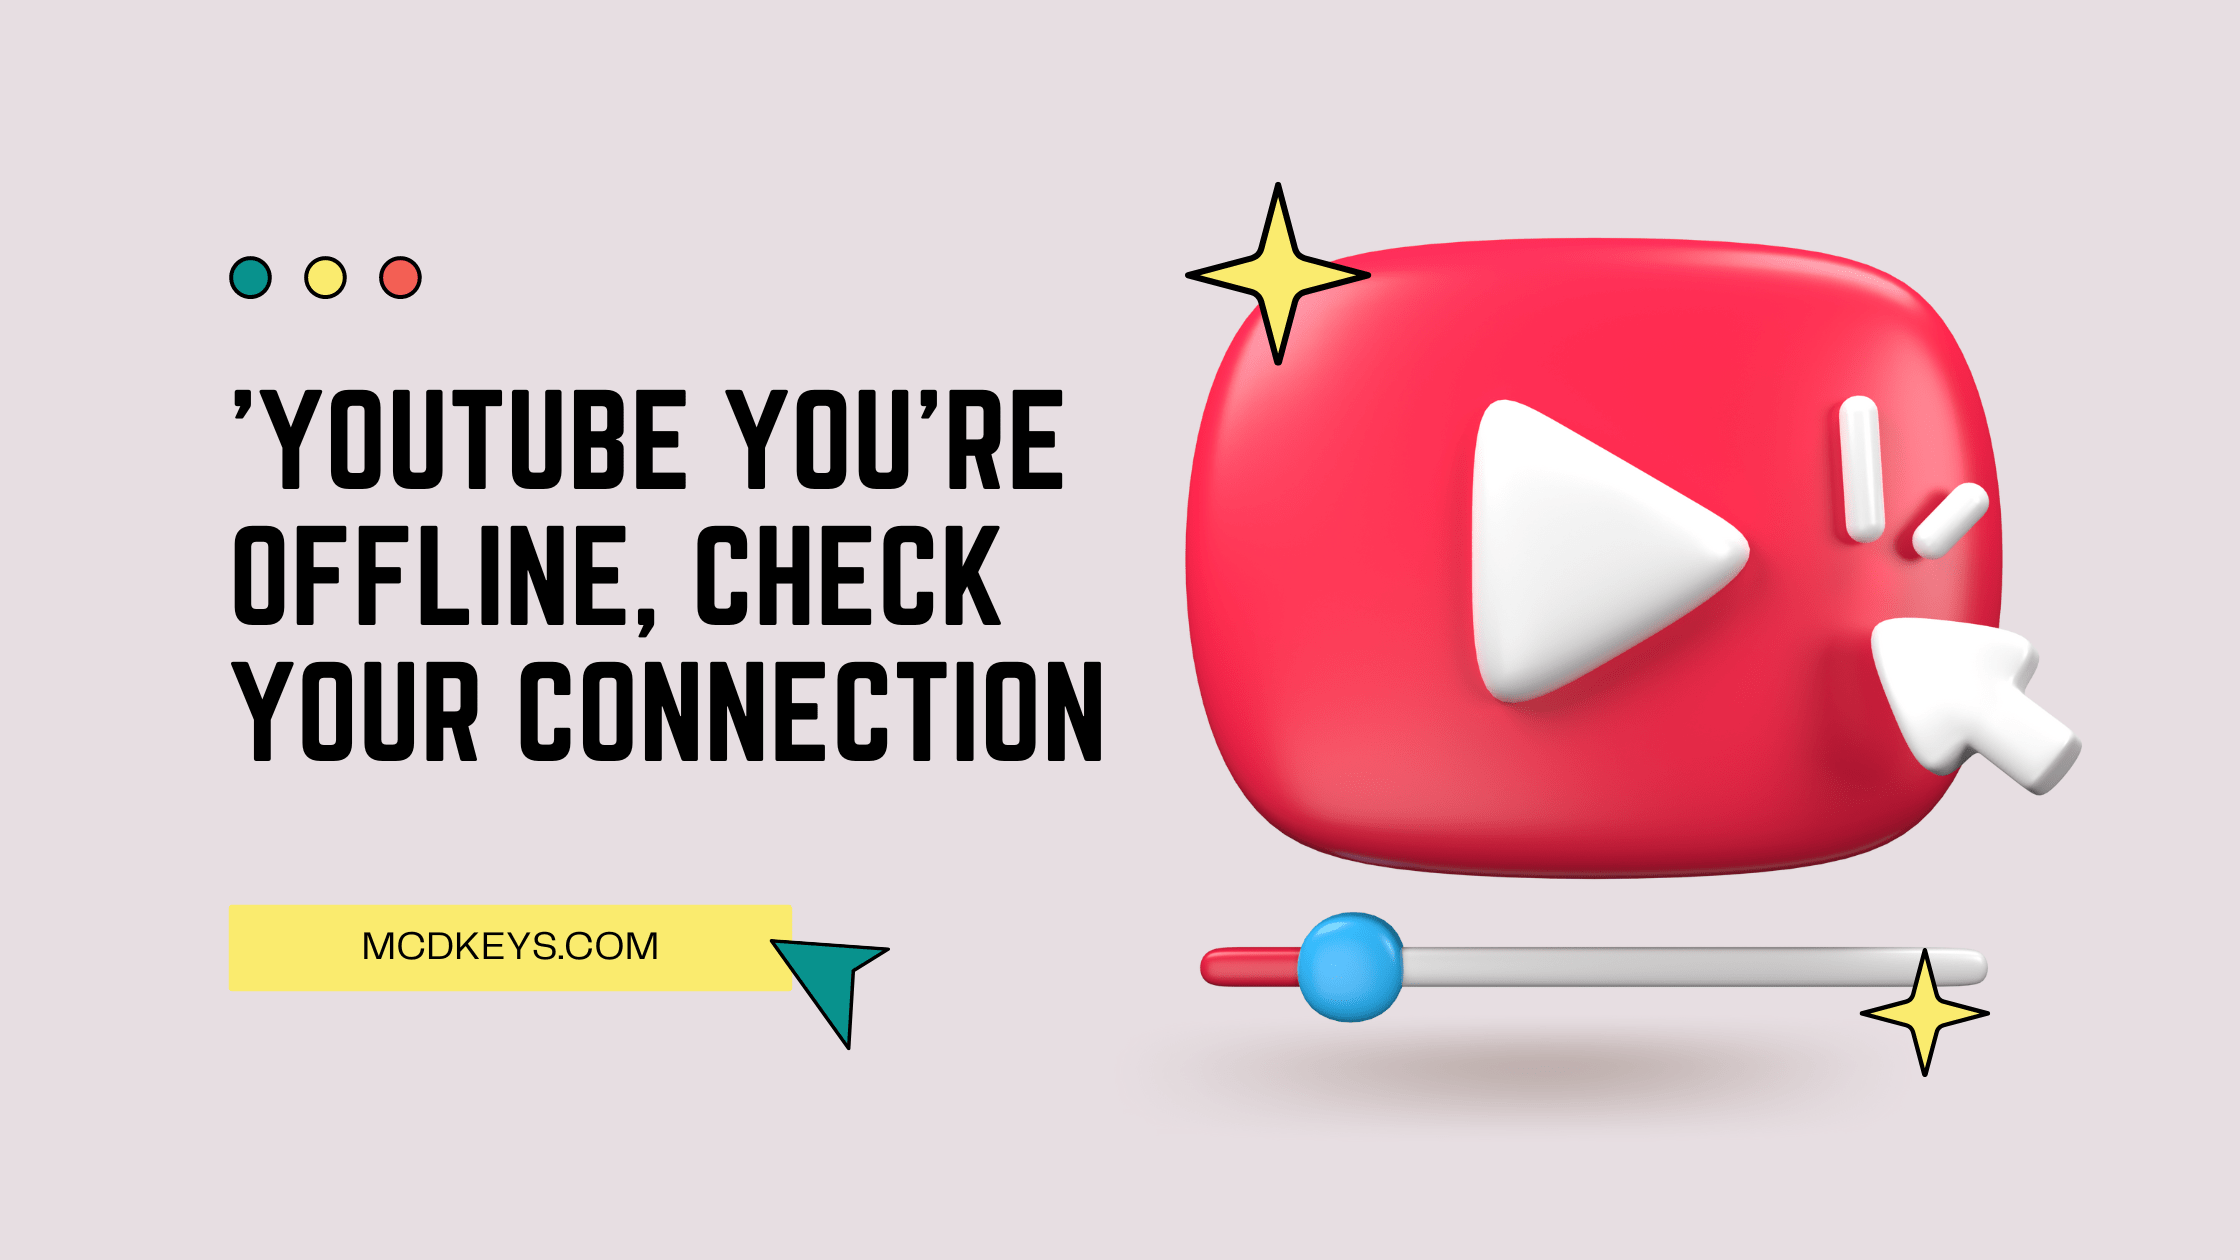 YouTube You're Offline, Check Your Connection